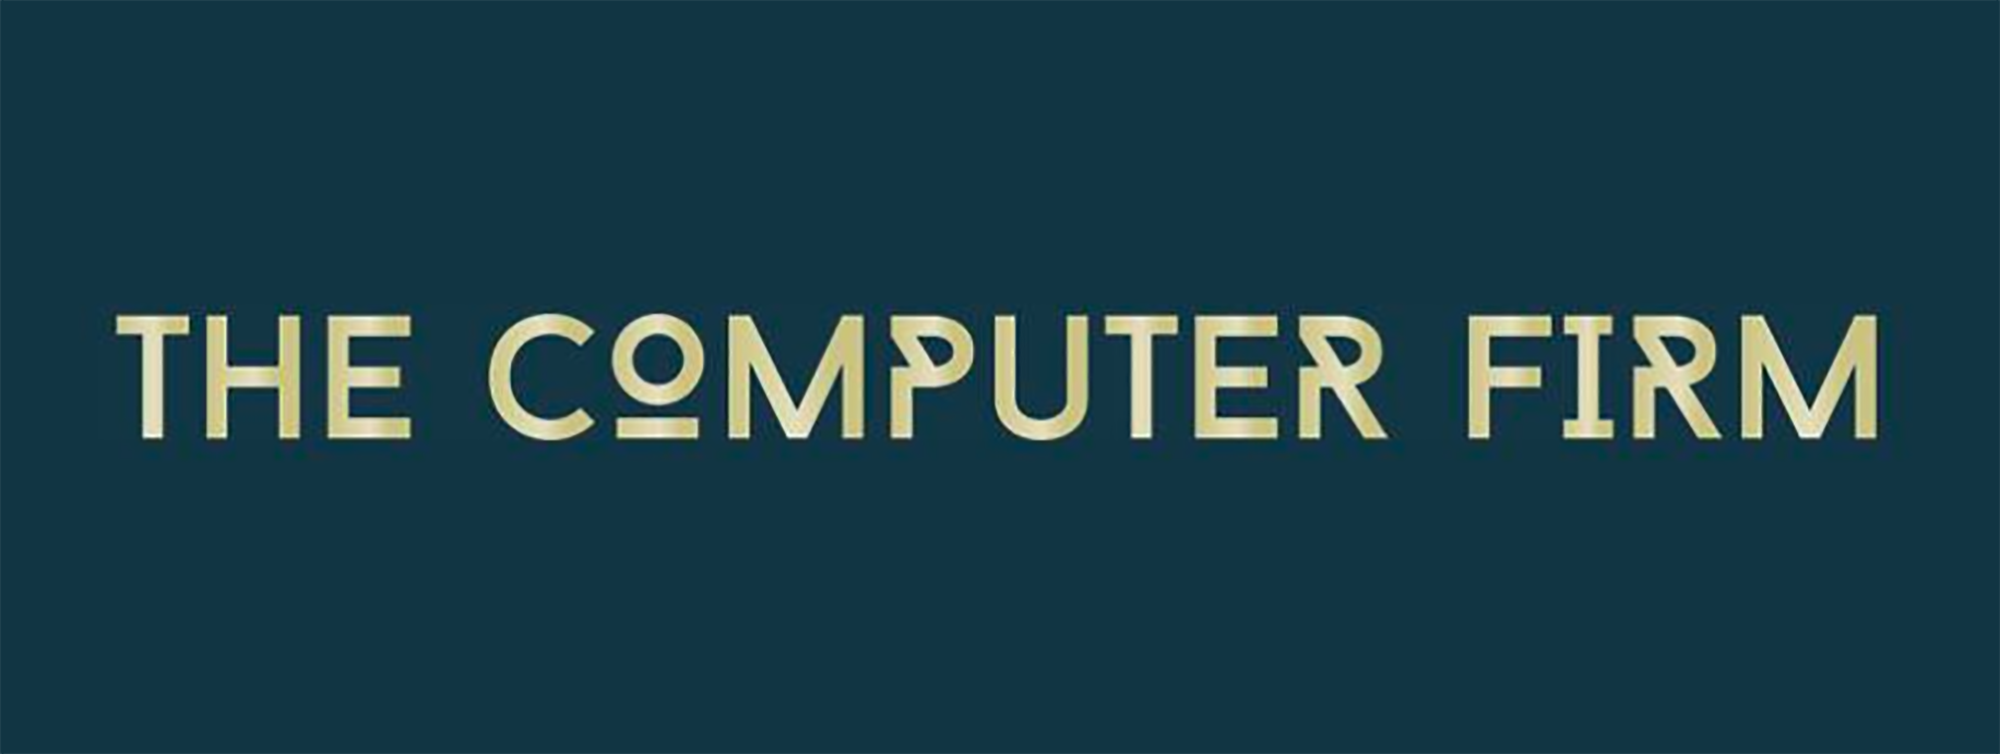 The Computer Firm cover